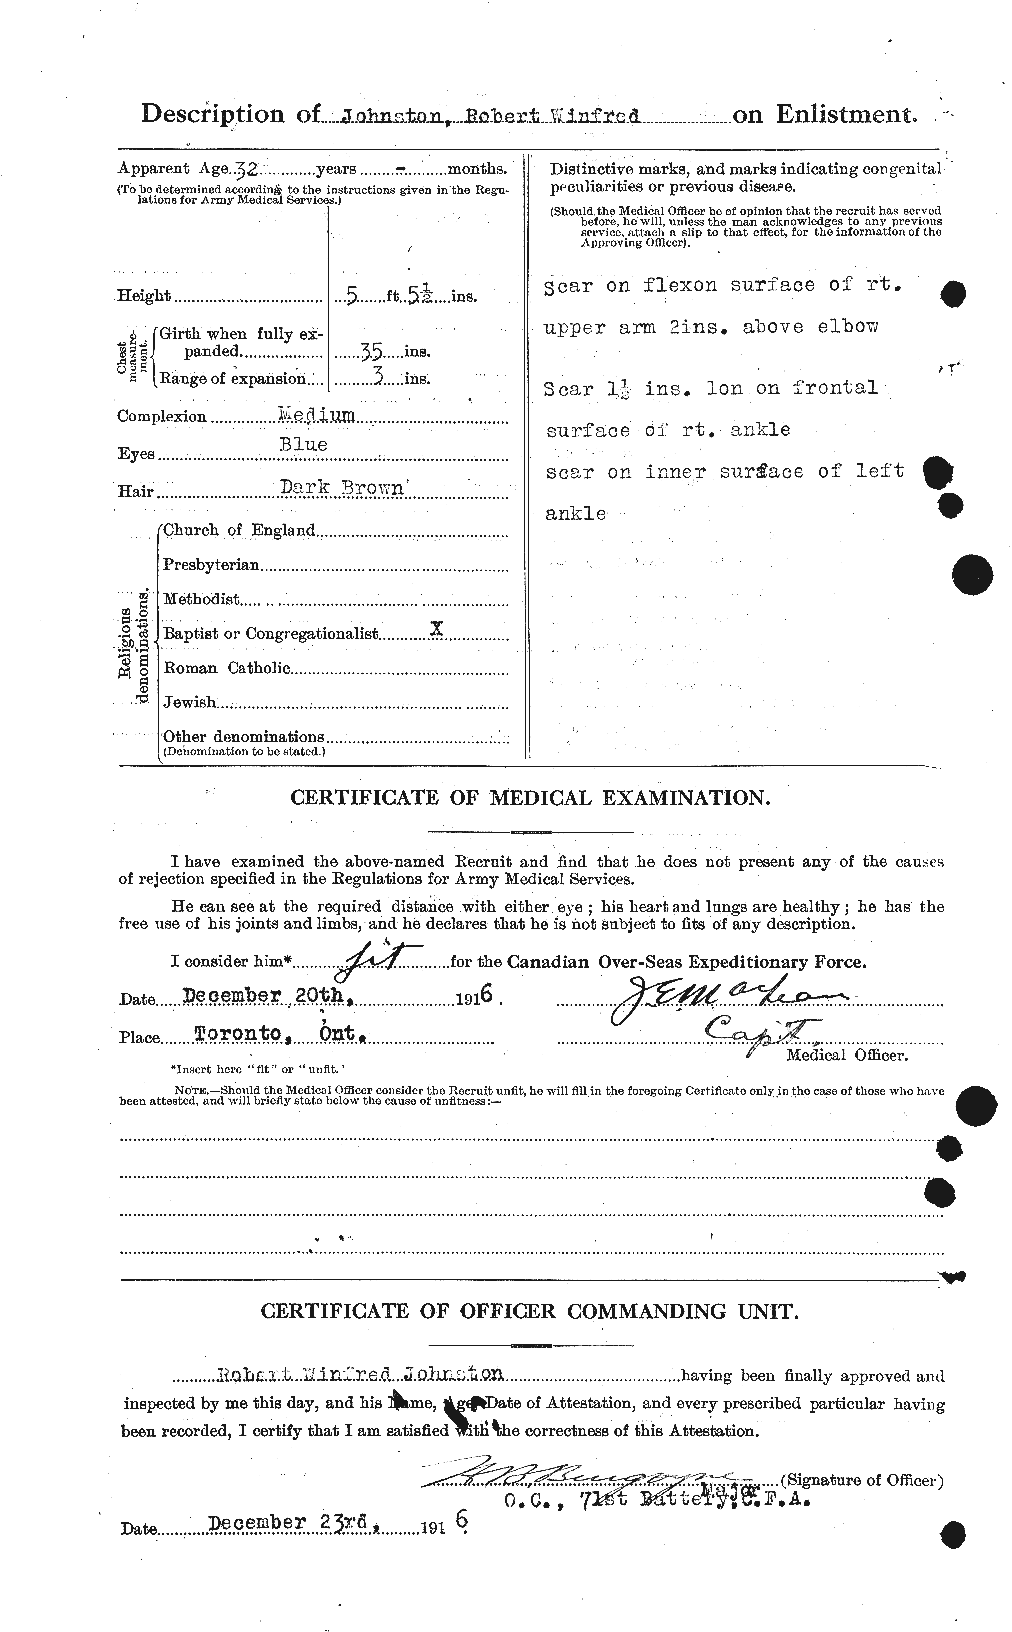 Personnel Records of the First World War - CEF 427042b